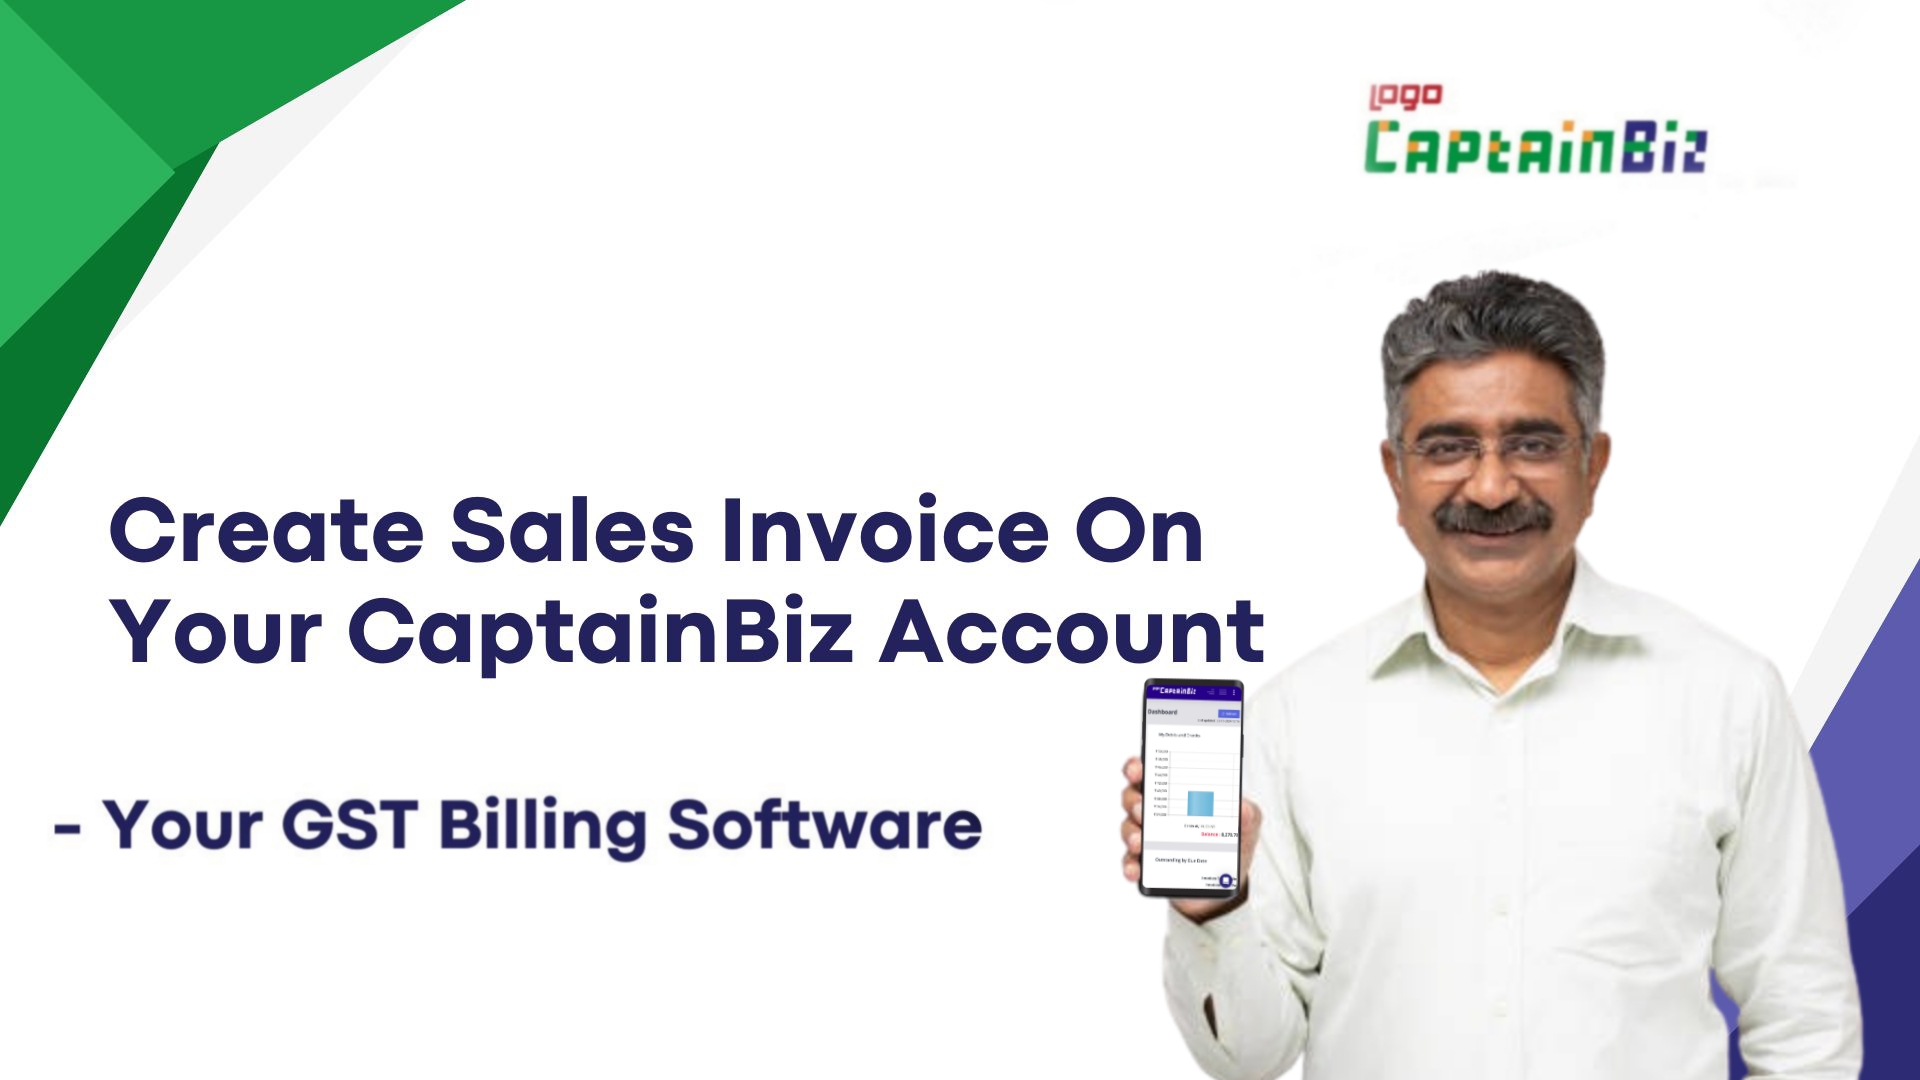 Process of Creating Sales Invoice With CaptainBiz Account